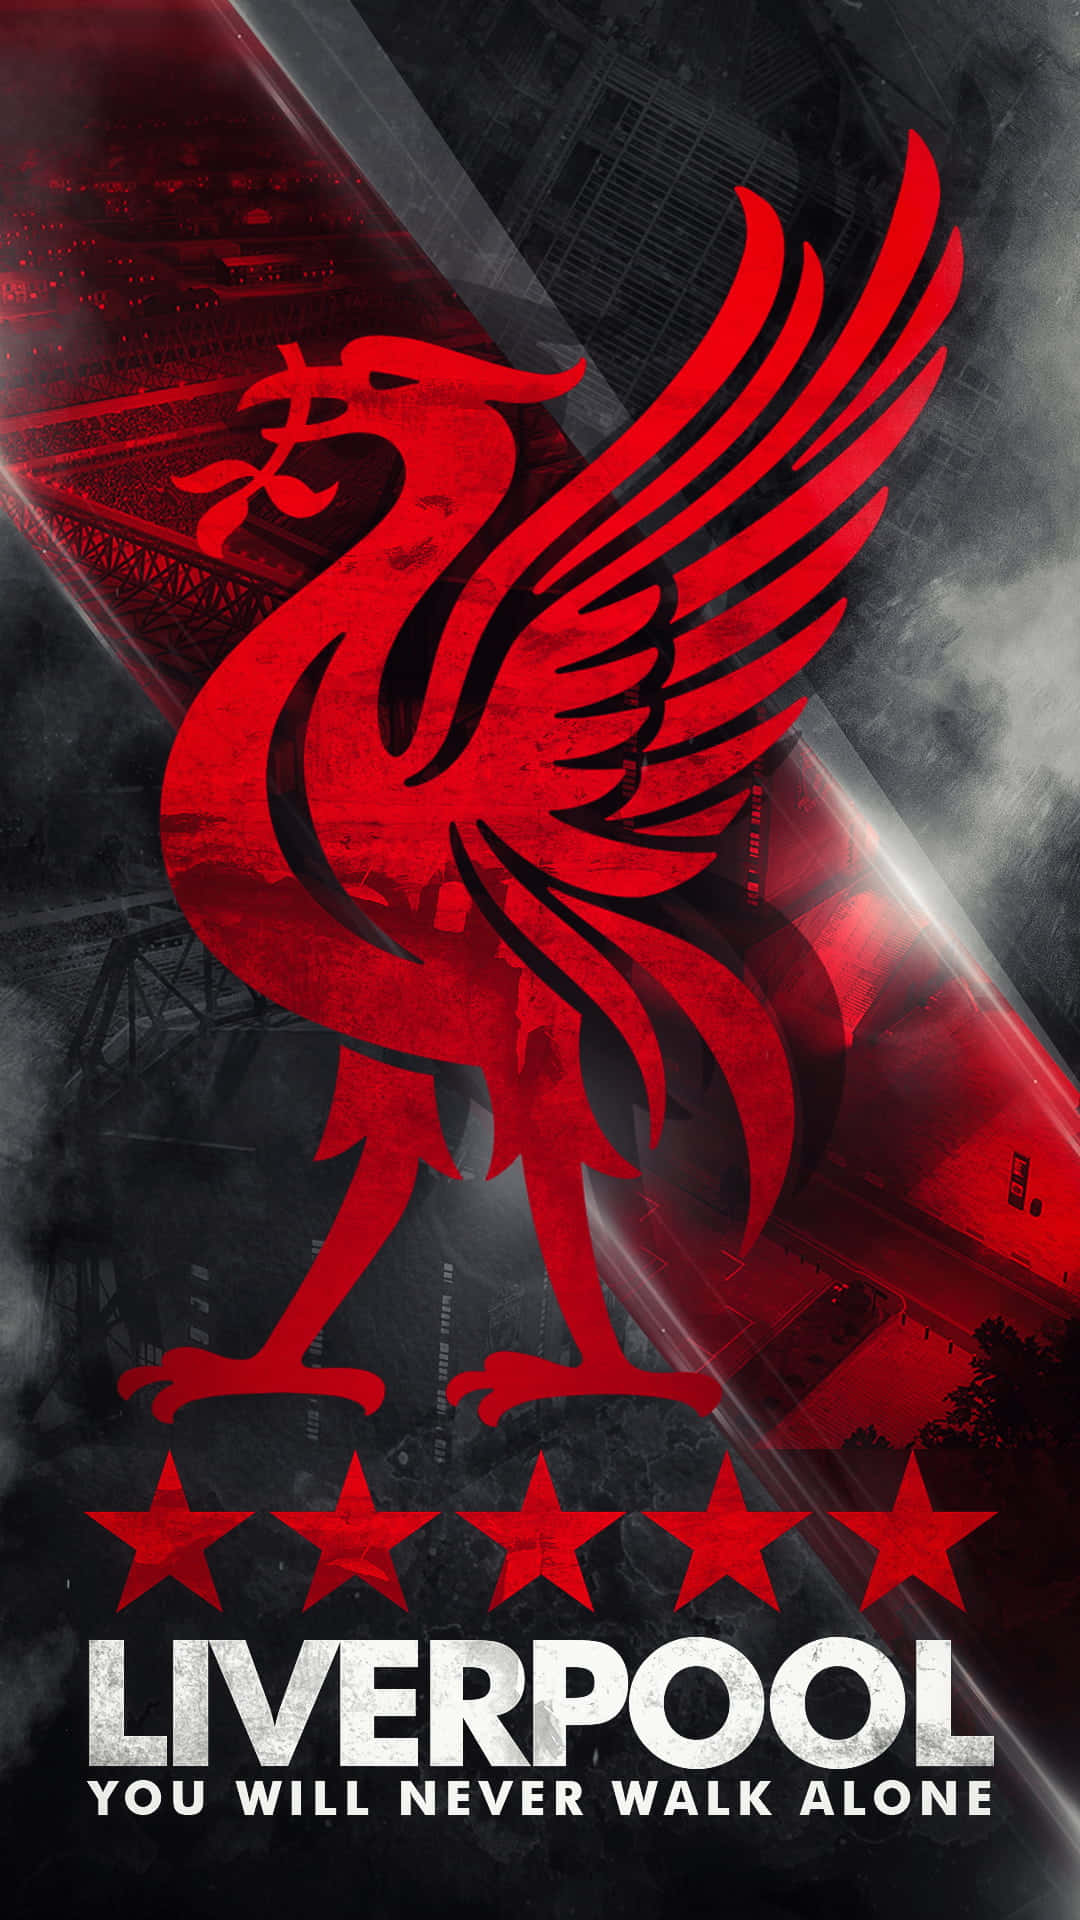 The iconic Liverpool logo celebrates their rich history and worldwide fan base" Wallpaper